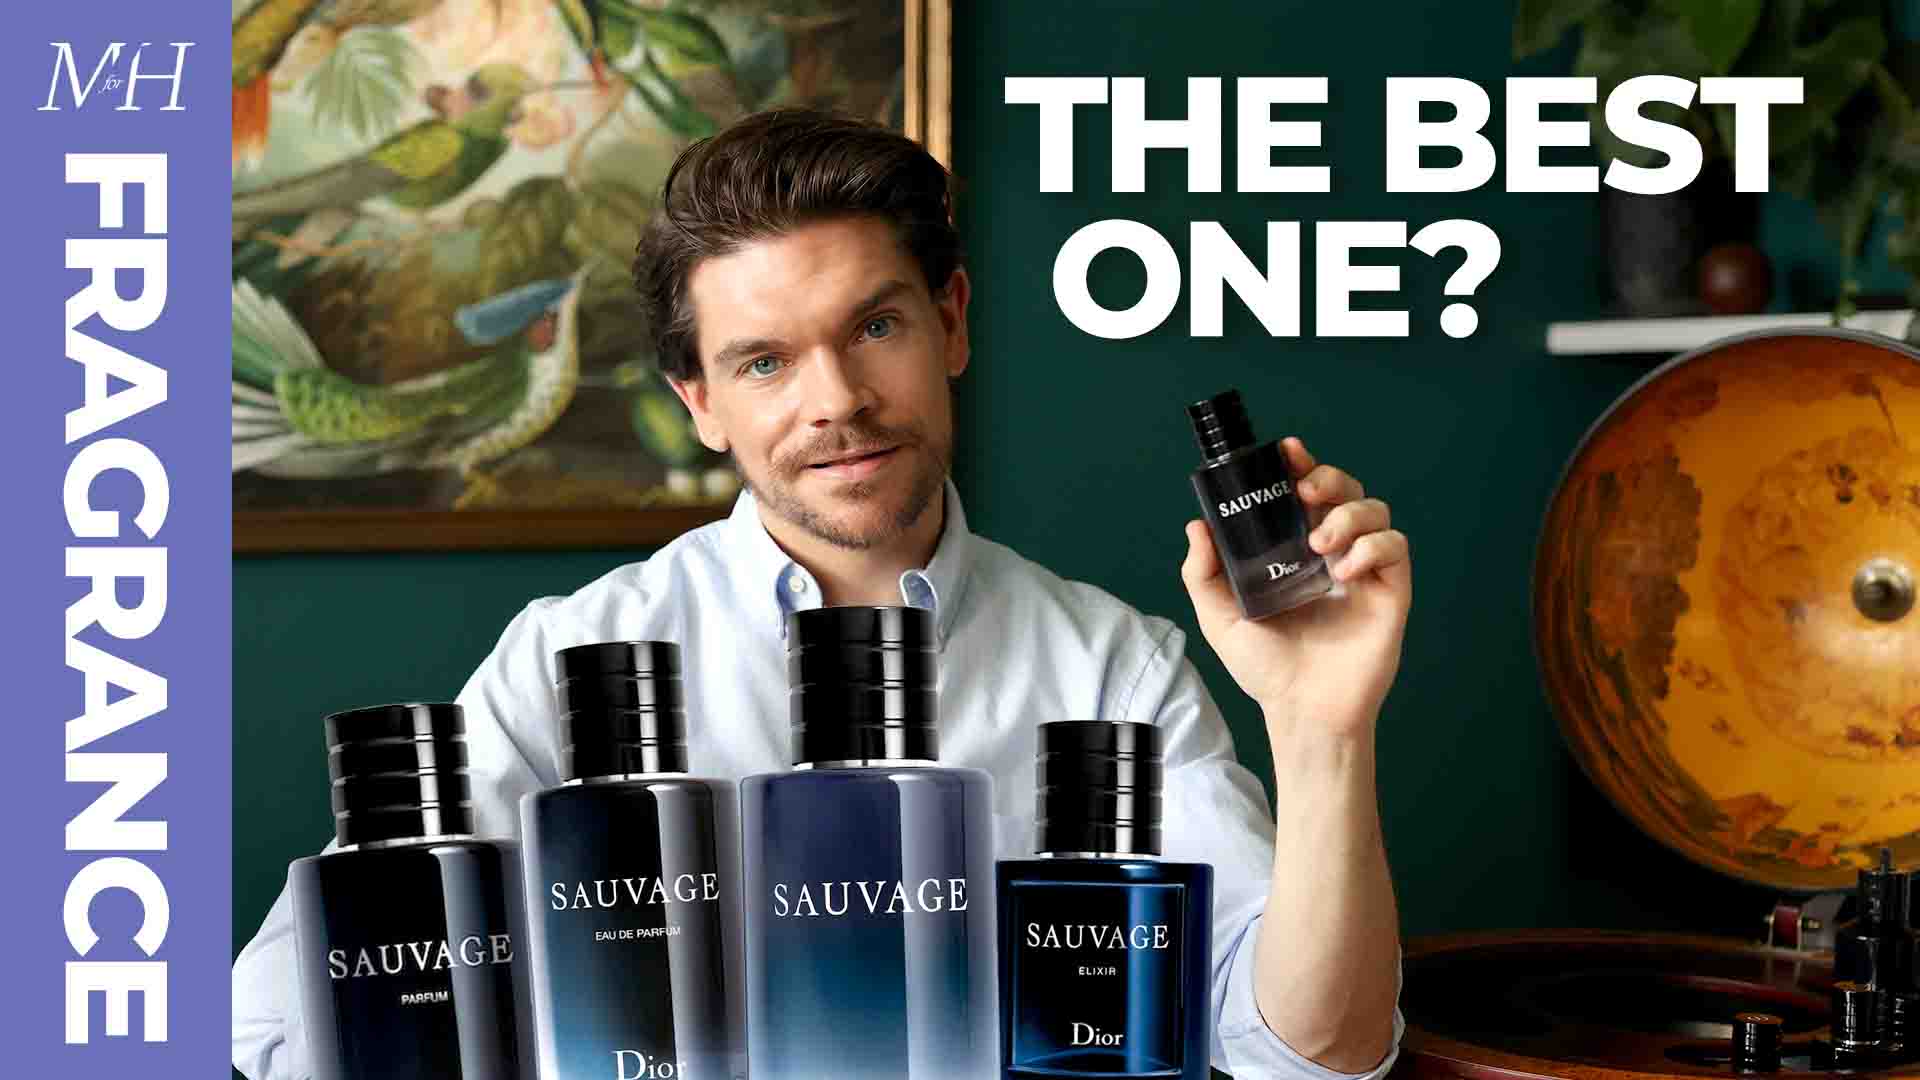 Dior Sauvage: Which Is The Best One?